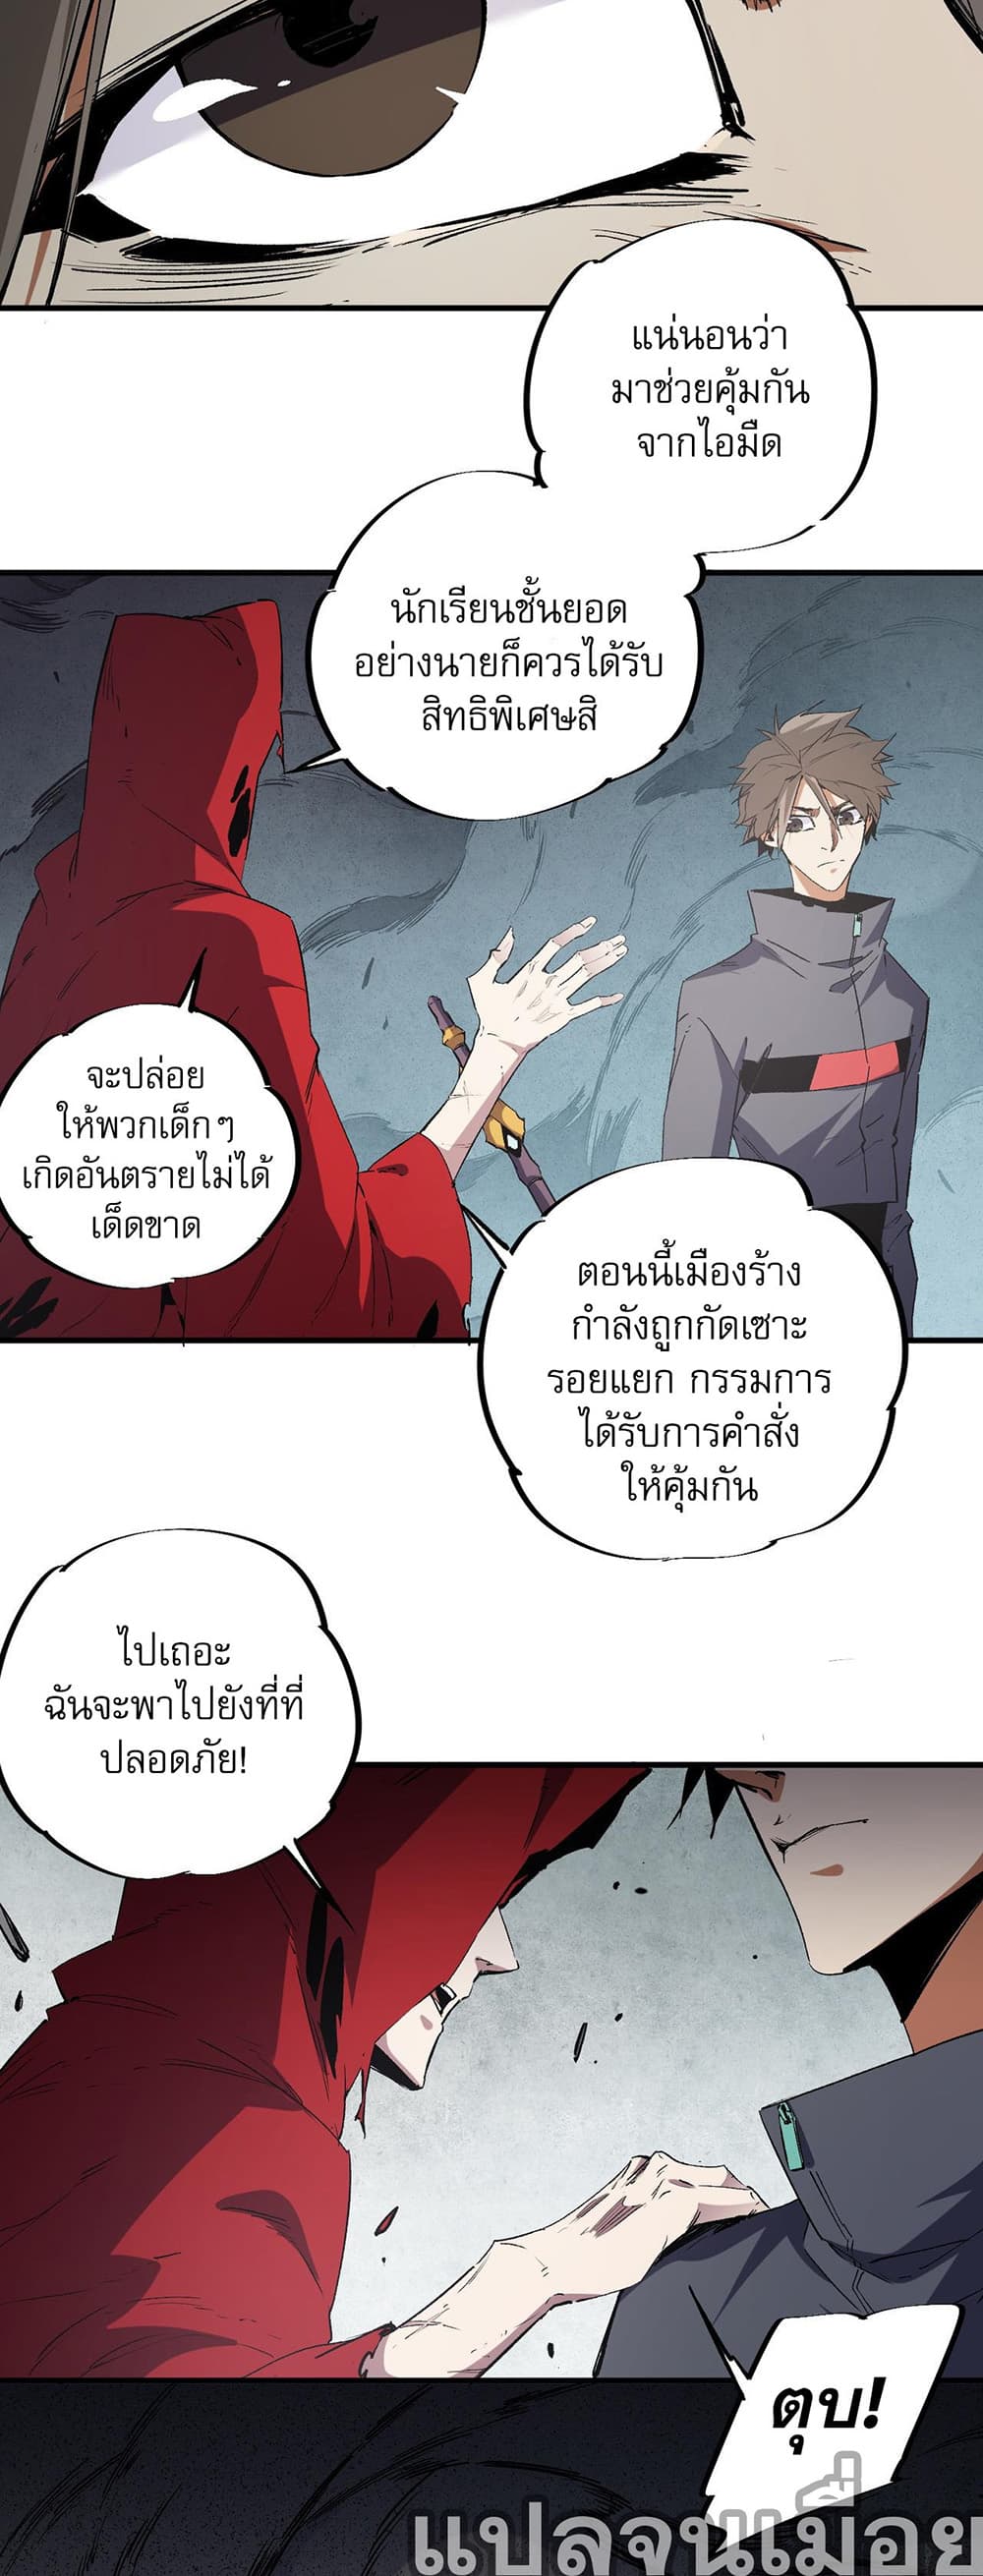 Job Changing for the Entire Population: The Jobless Me Will Terminate the Gods ฉันคือผู้เล่นไร้อาชีพที่สังหารเหล่าเทพ 42-42